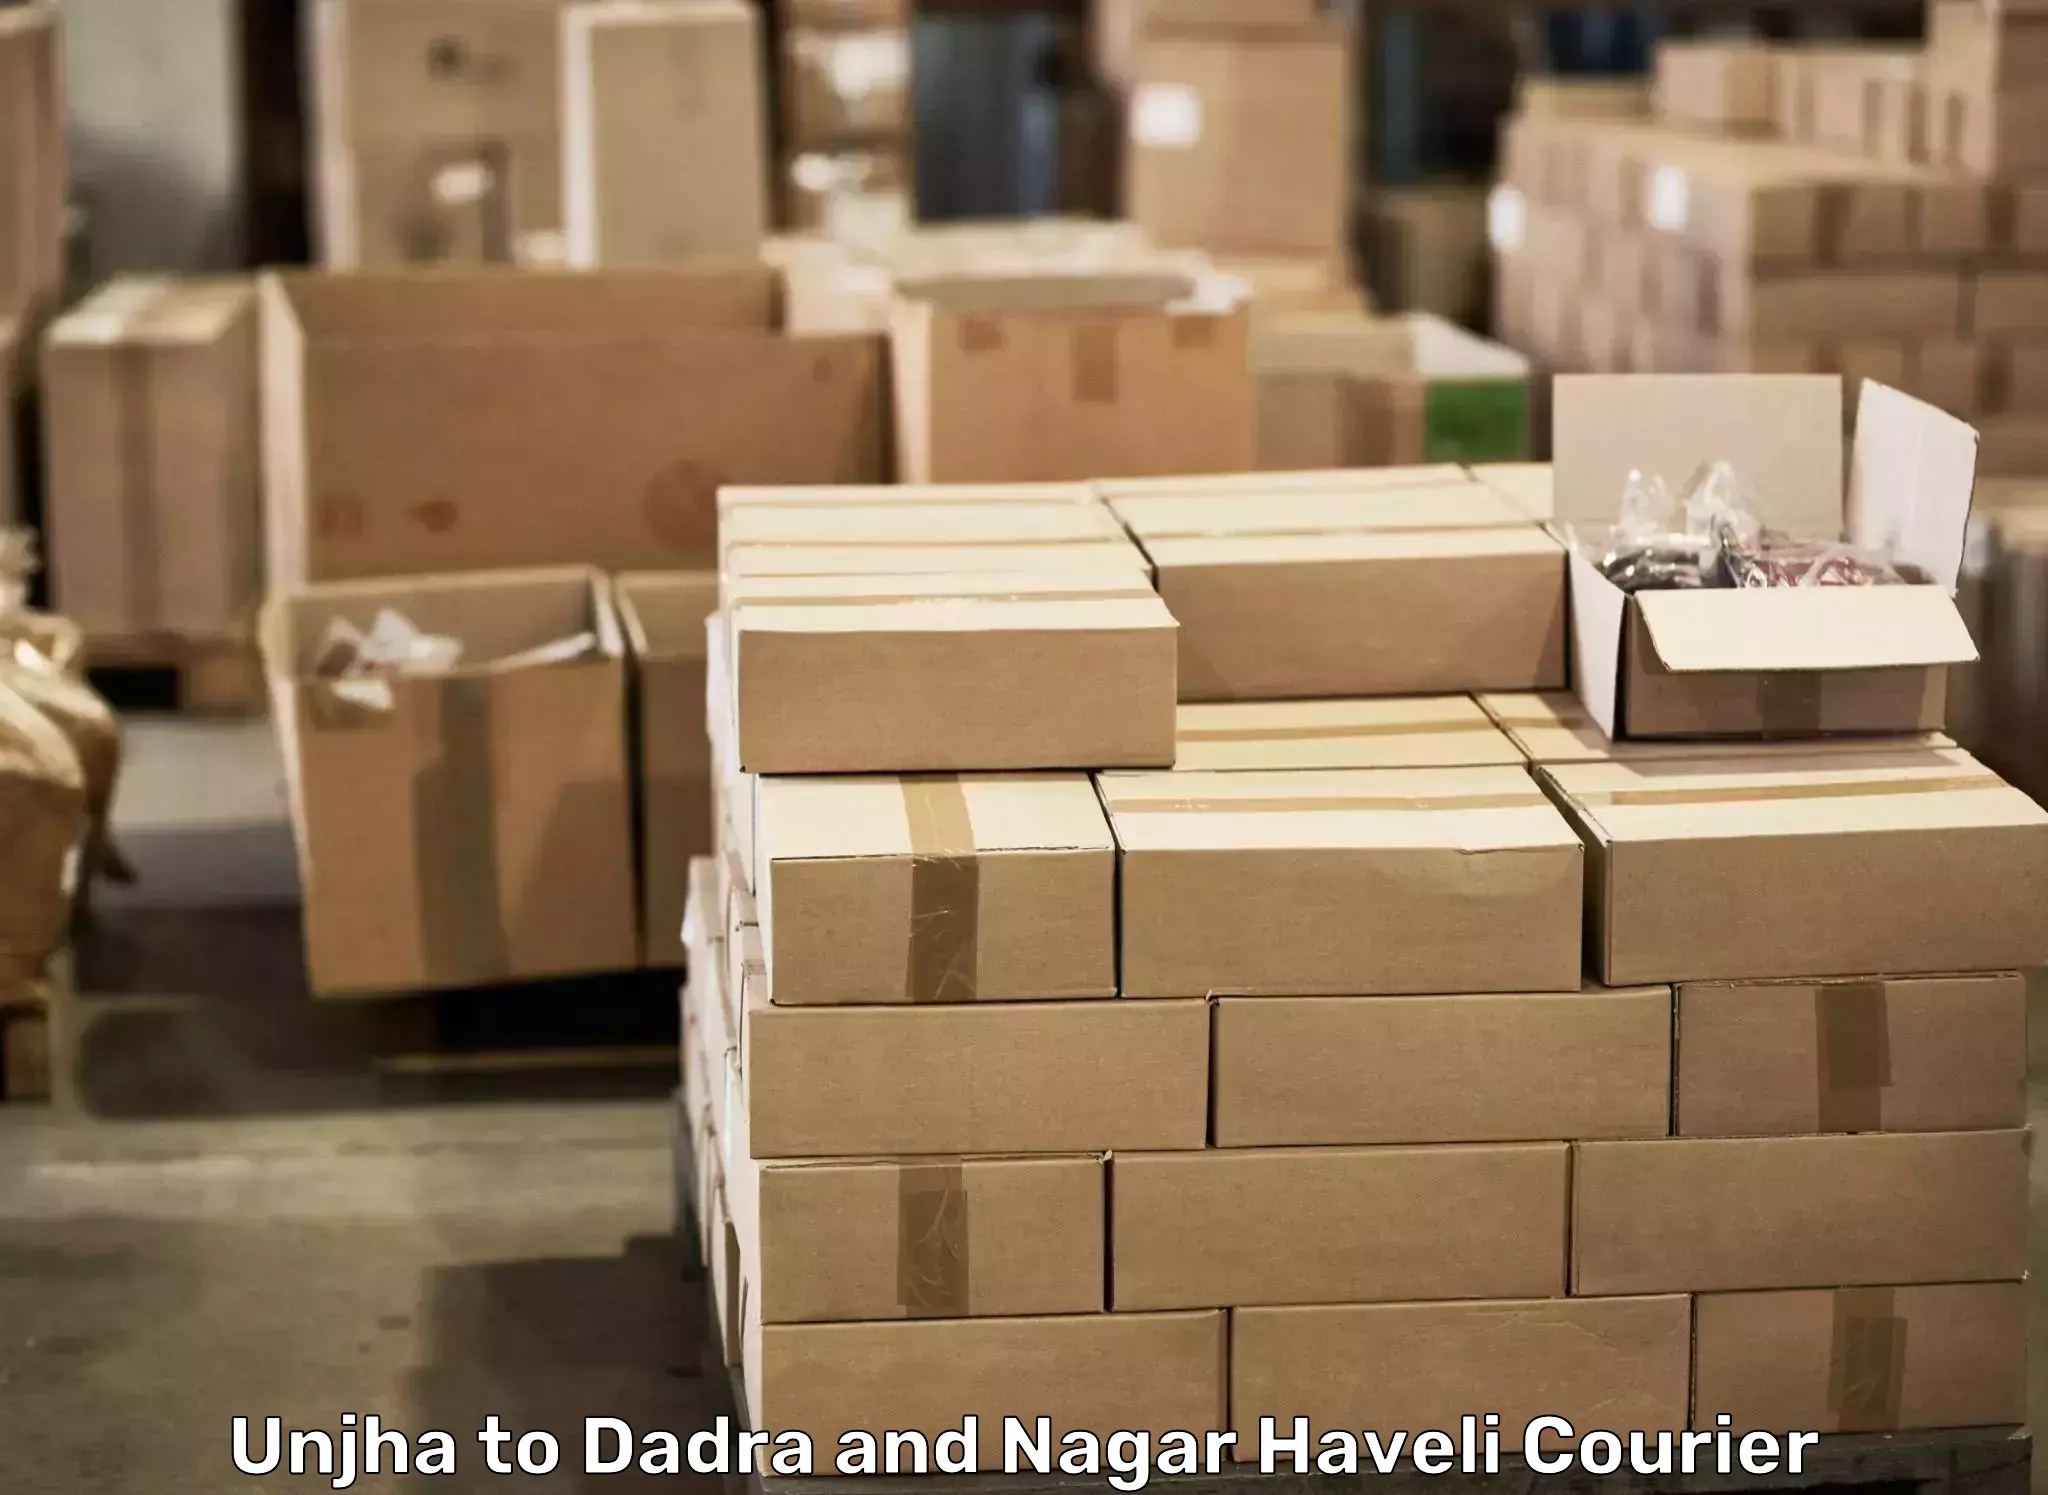 Trusted relocation experts in Unjha to Dadra and Nagar Haveli